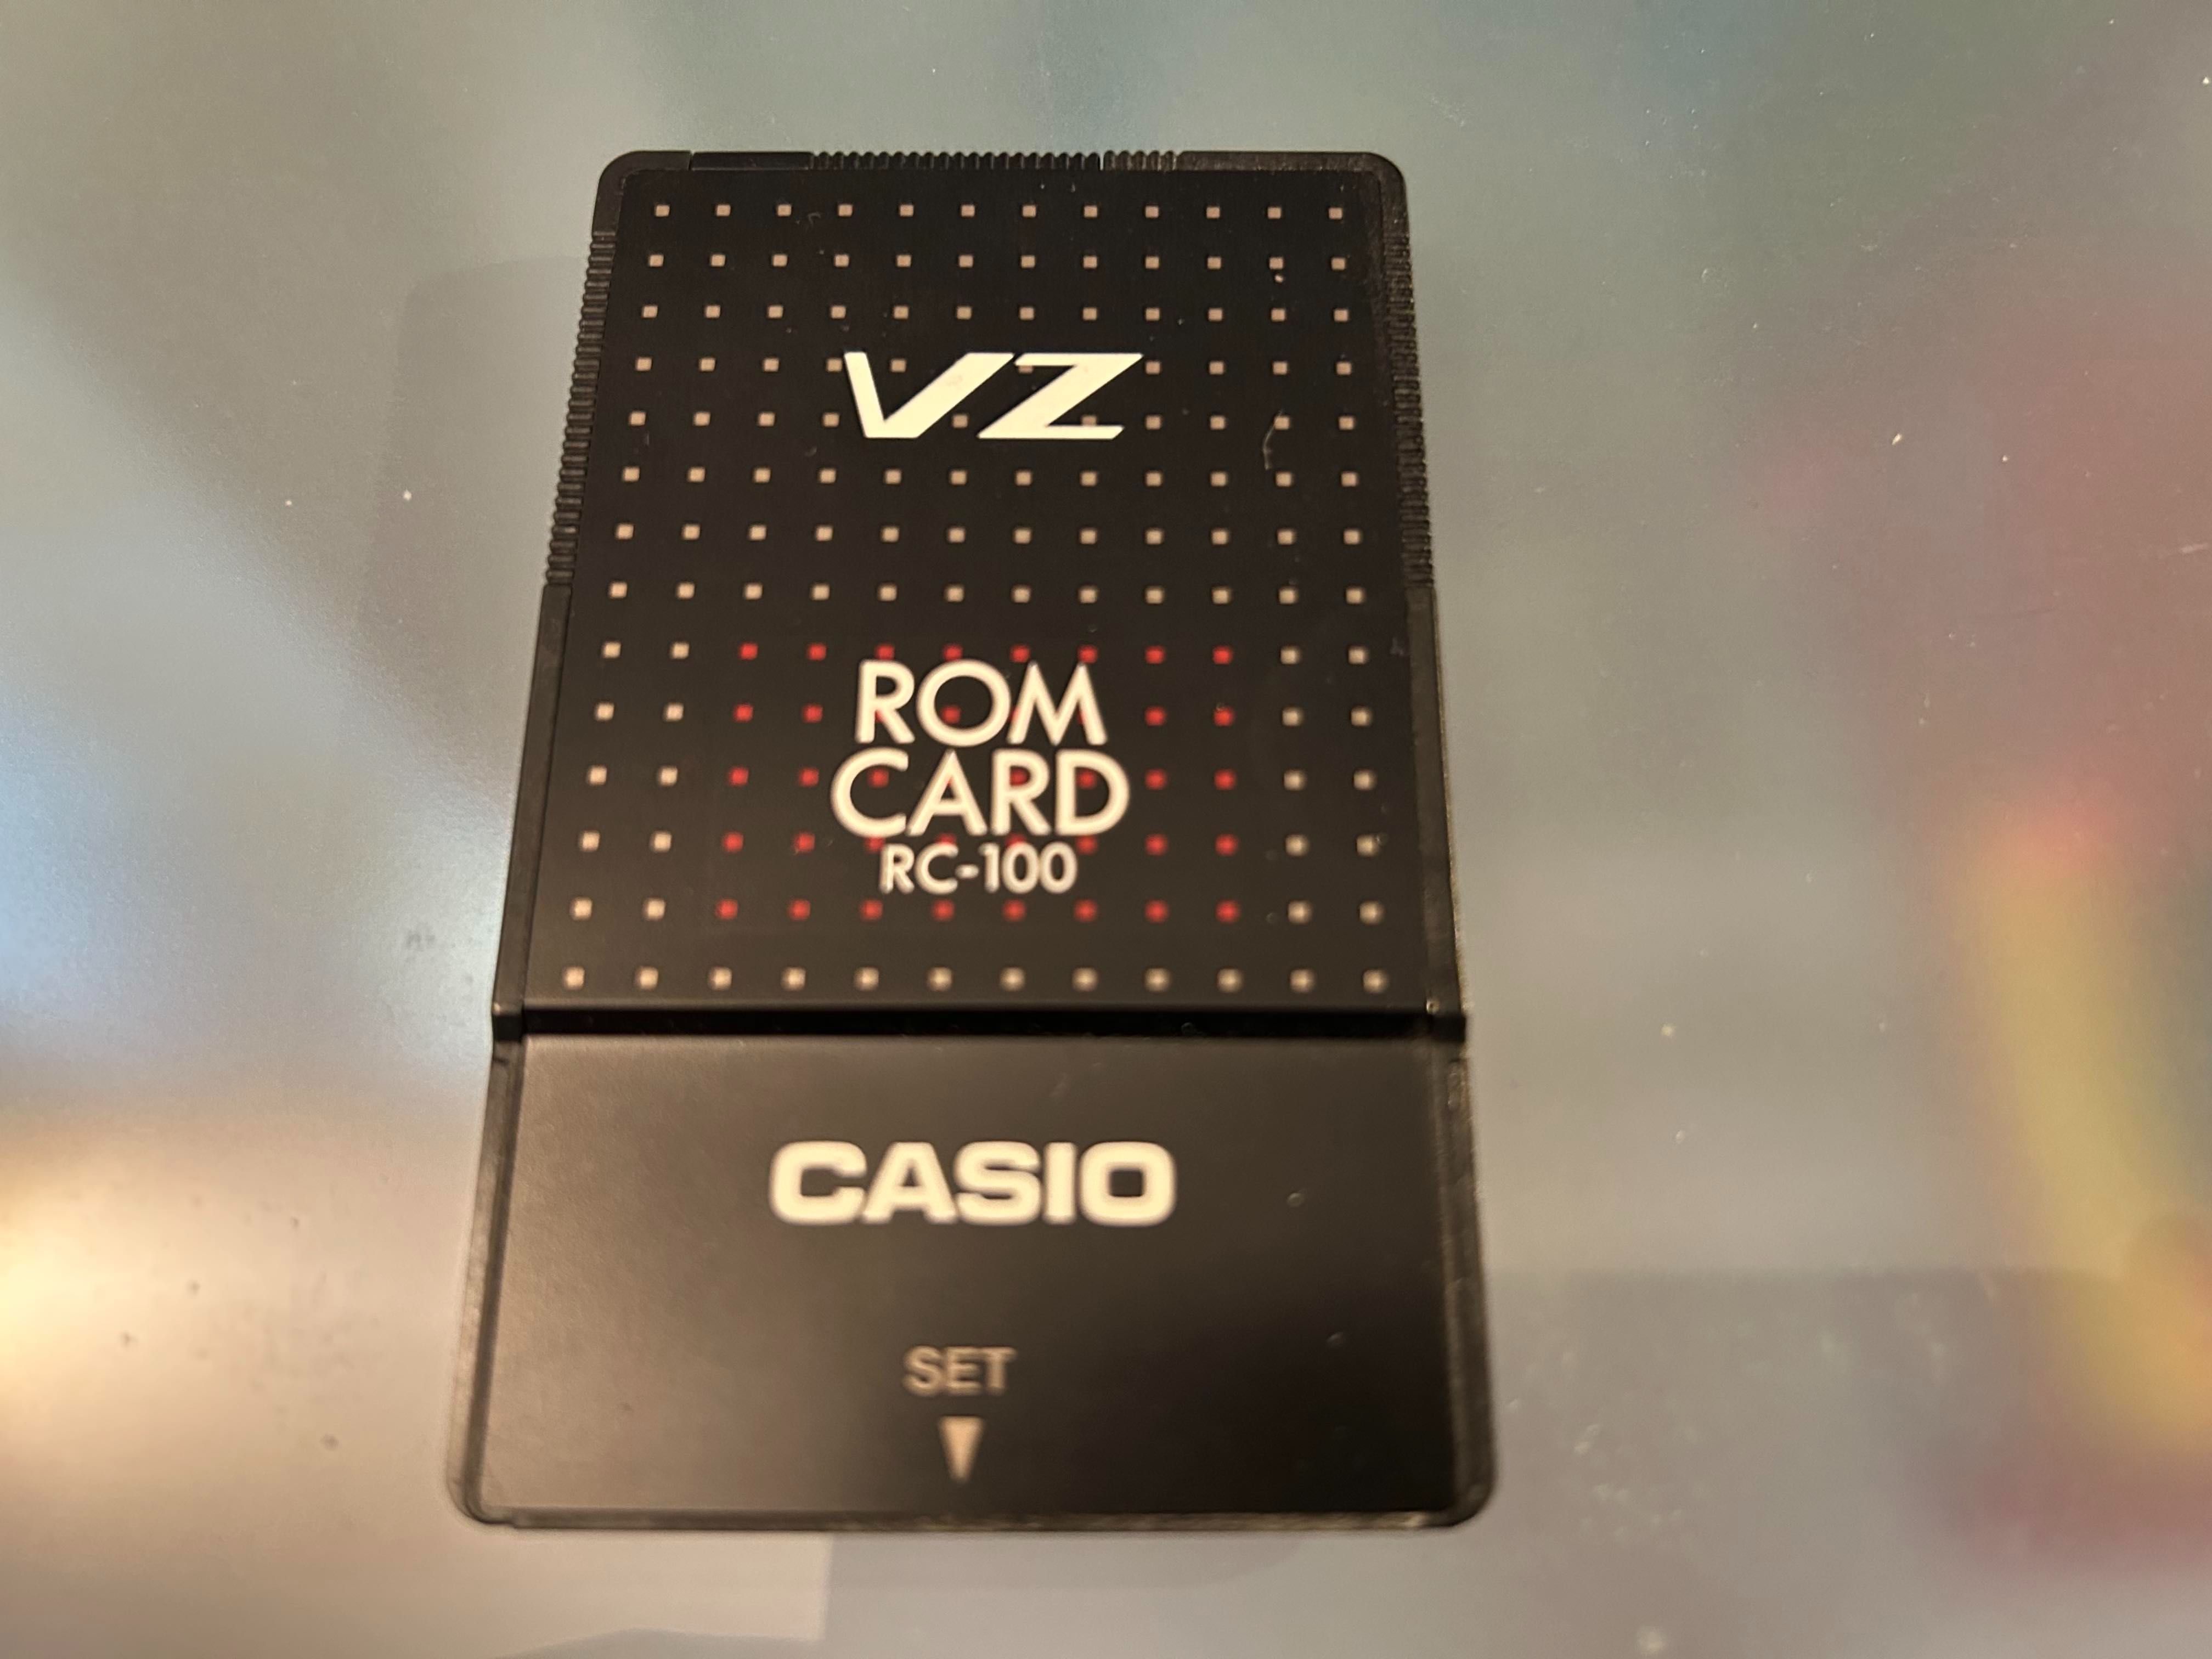 Casio RC-100 ROM Card for VZ